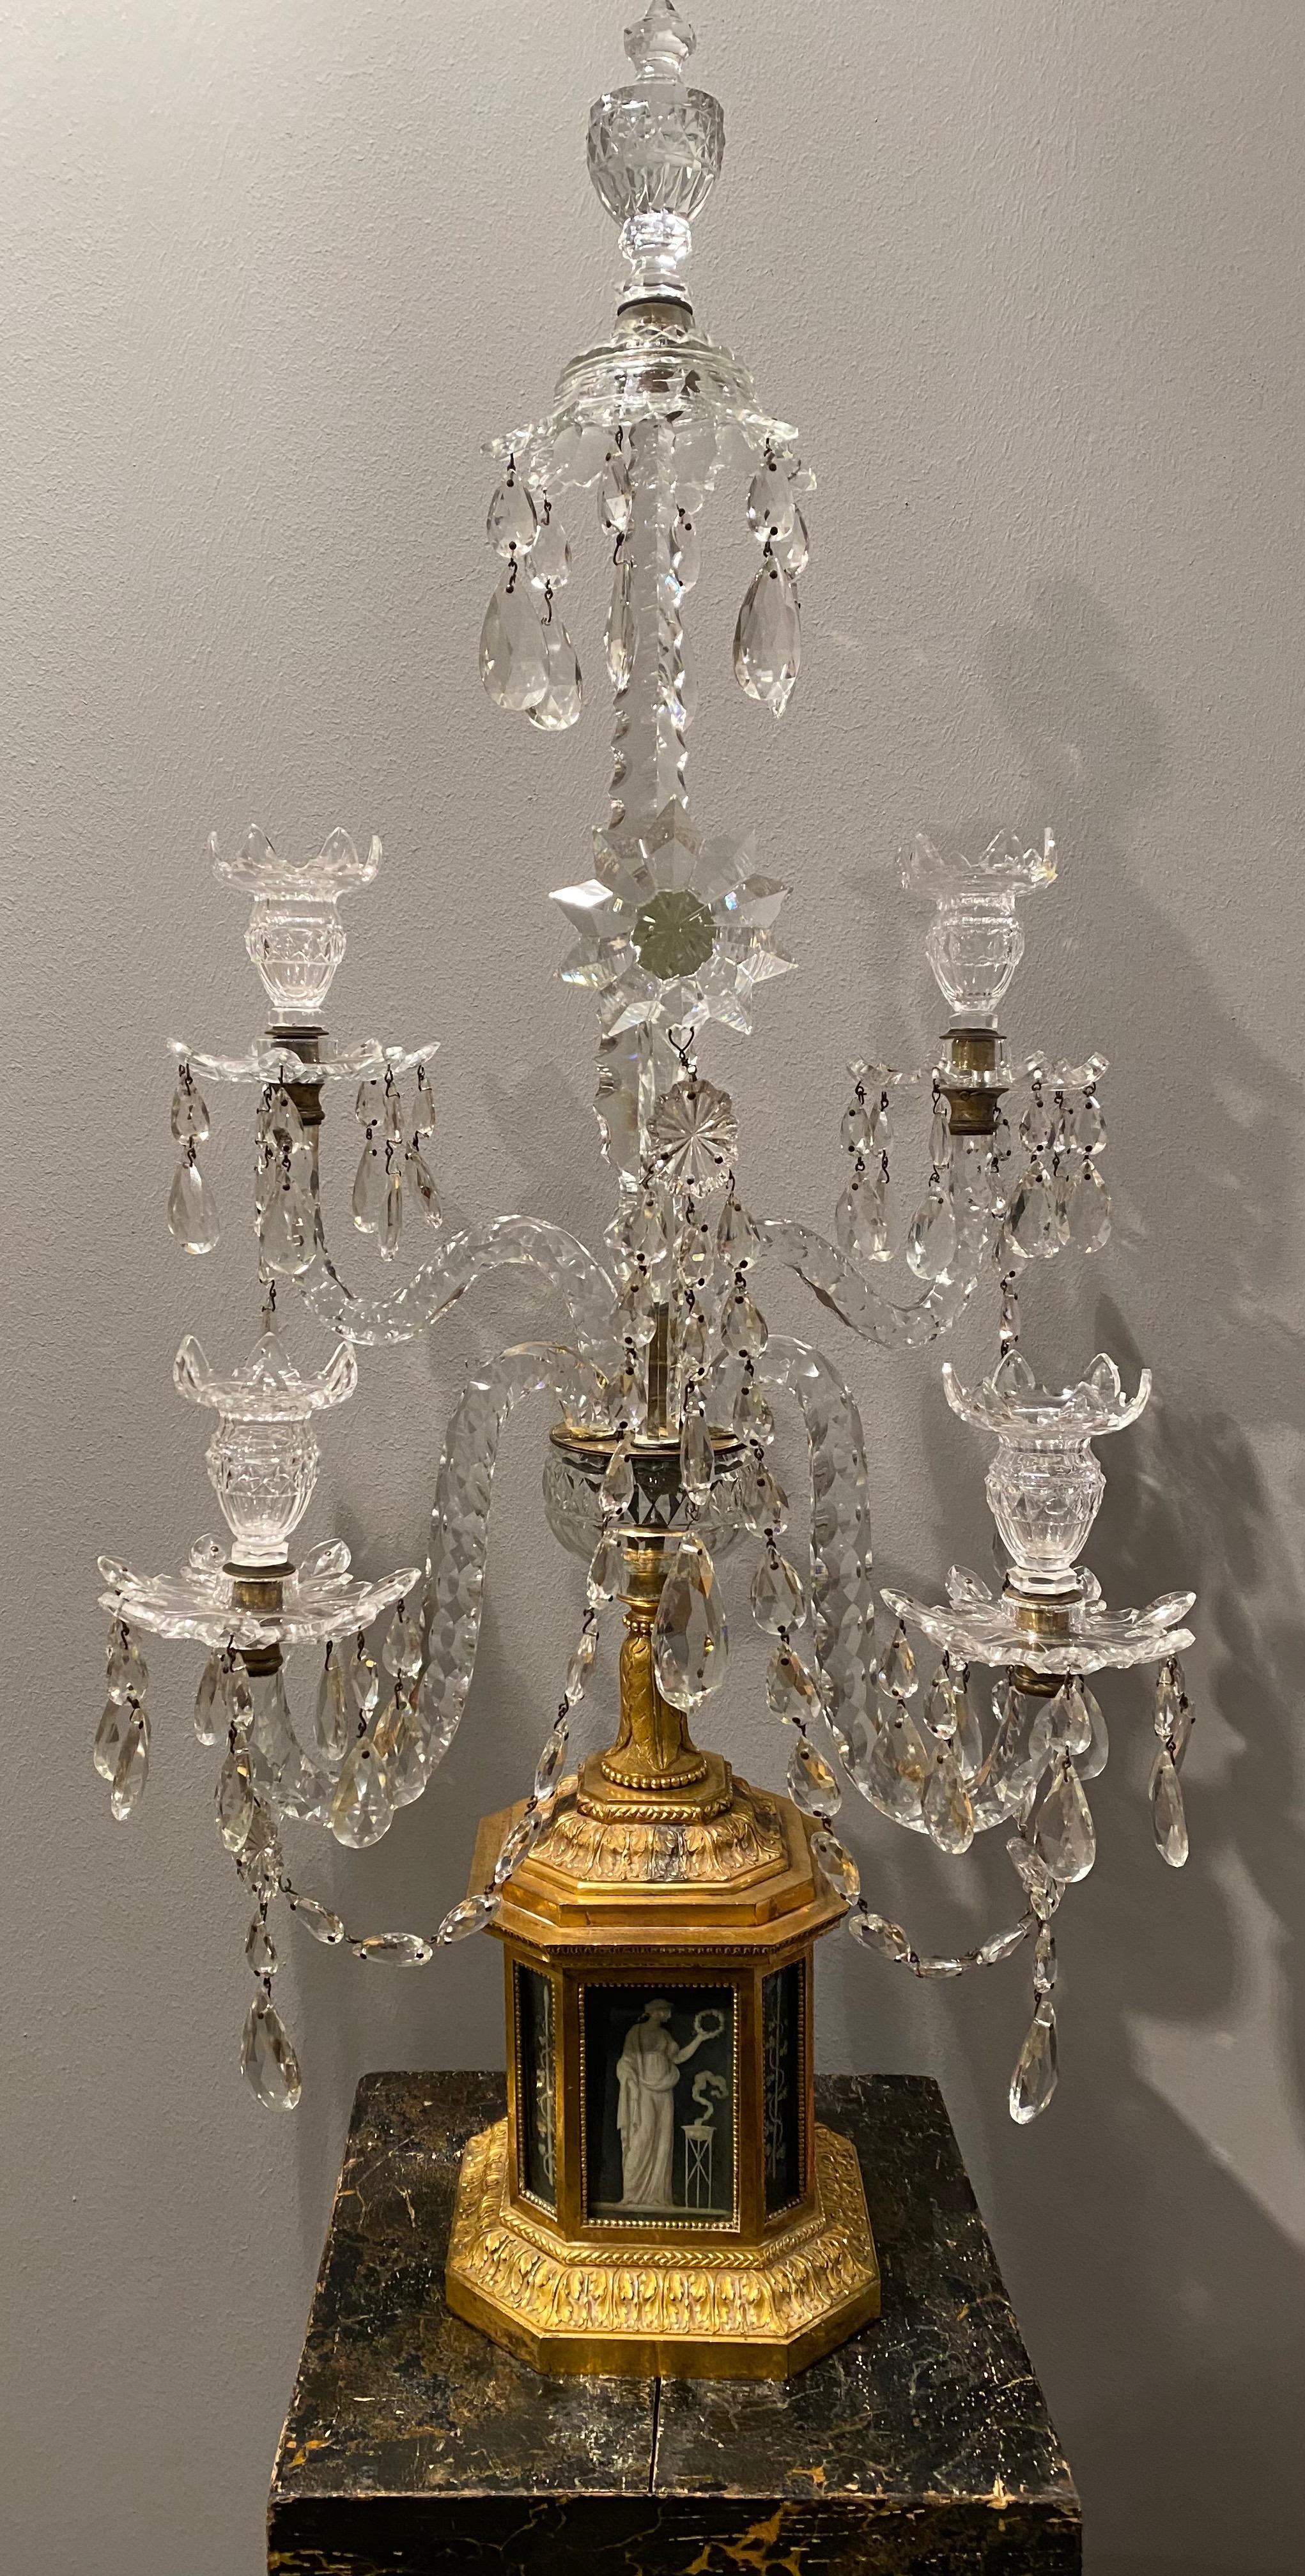 A pair of important and highly unusual candelabra from the 1780s. The bases are made of gilt bronze with inserted, glasscovered paintings on ivory. The paintings are by Piat-Joseph Sauvage (1744-1818). They are depicting different classical figures